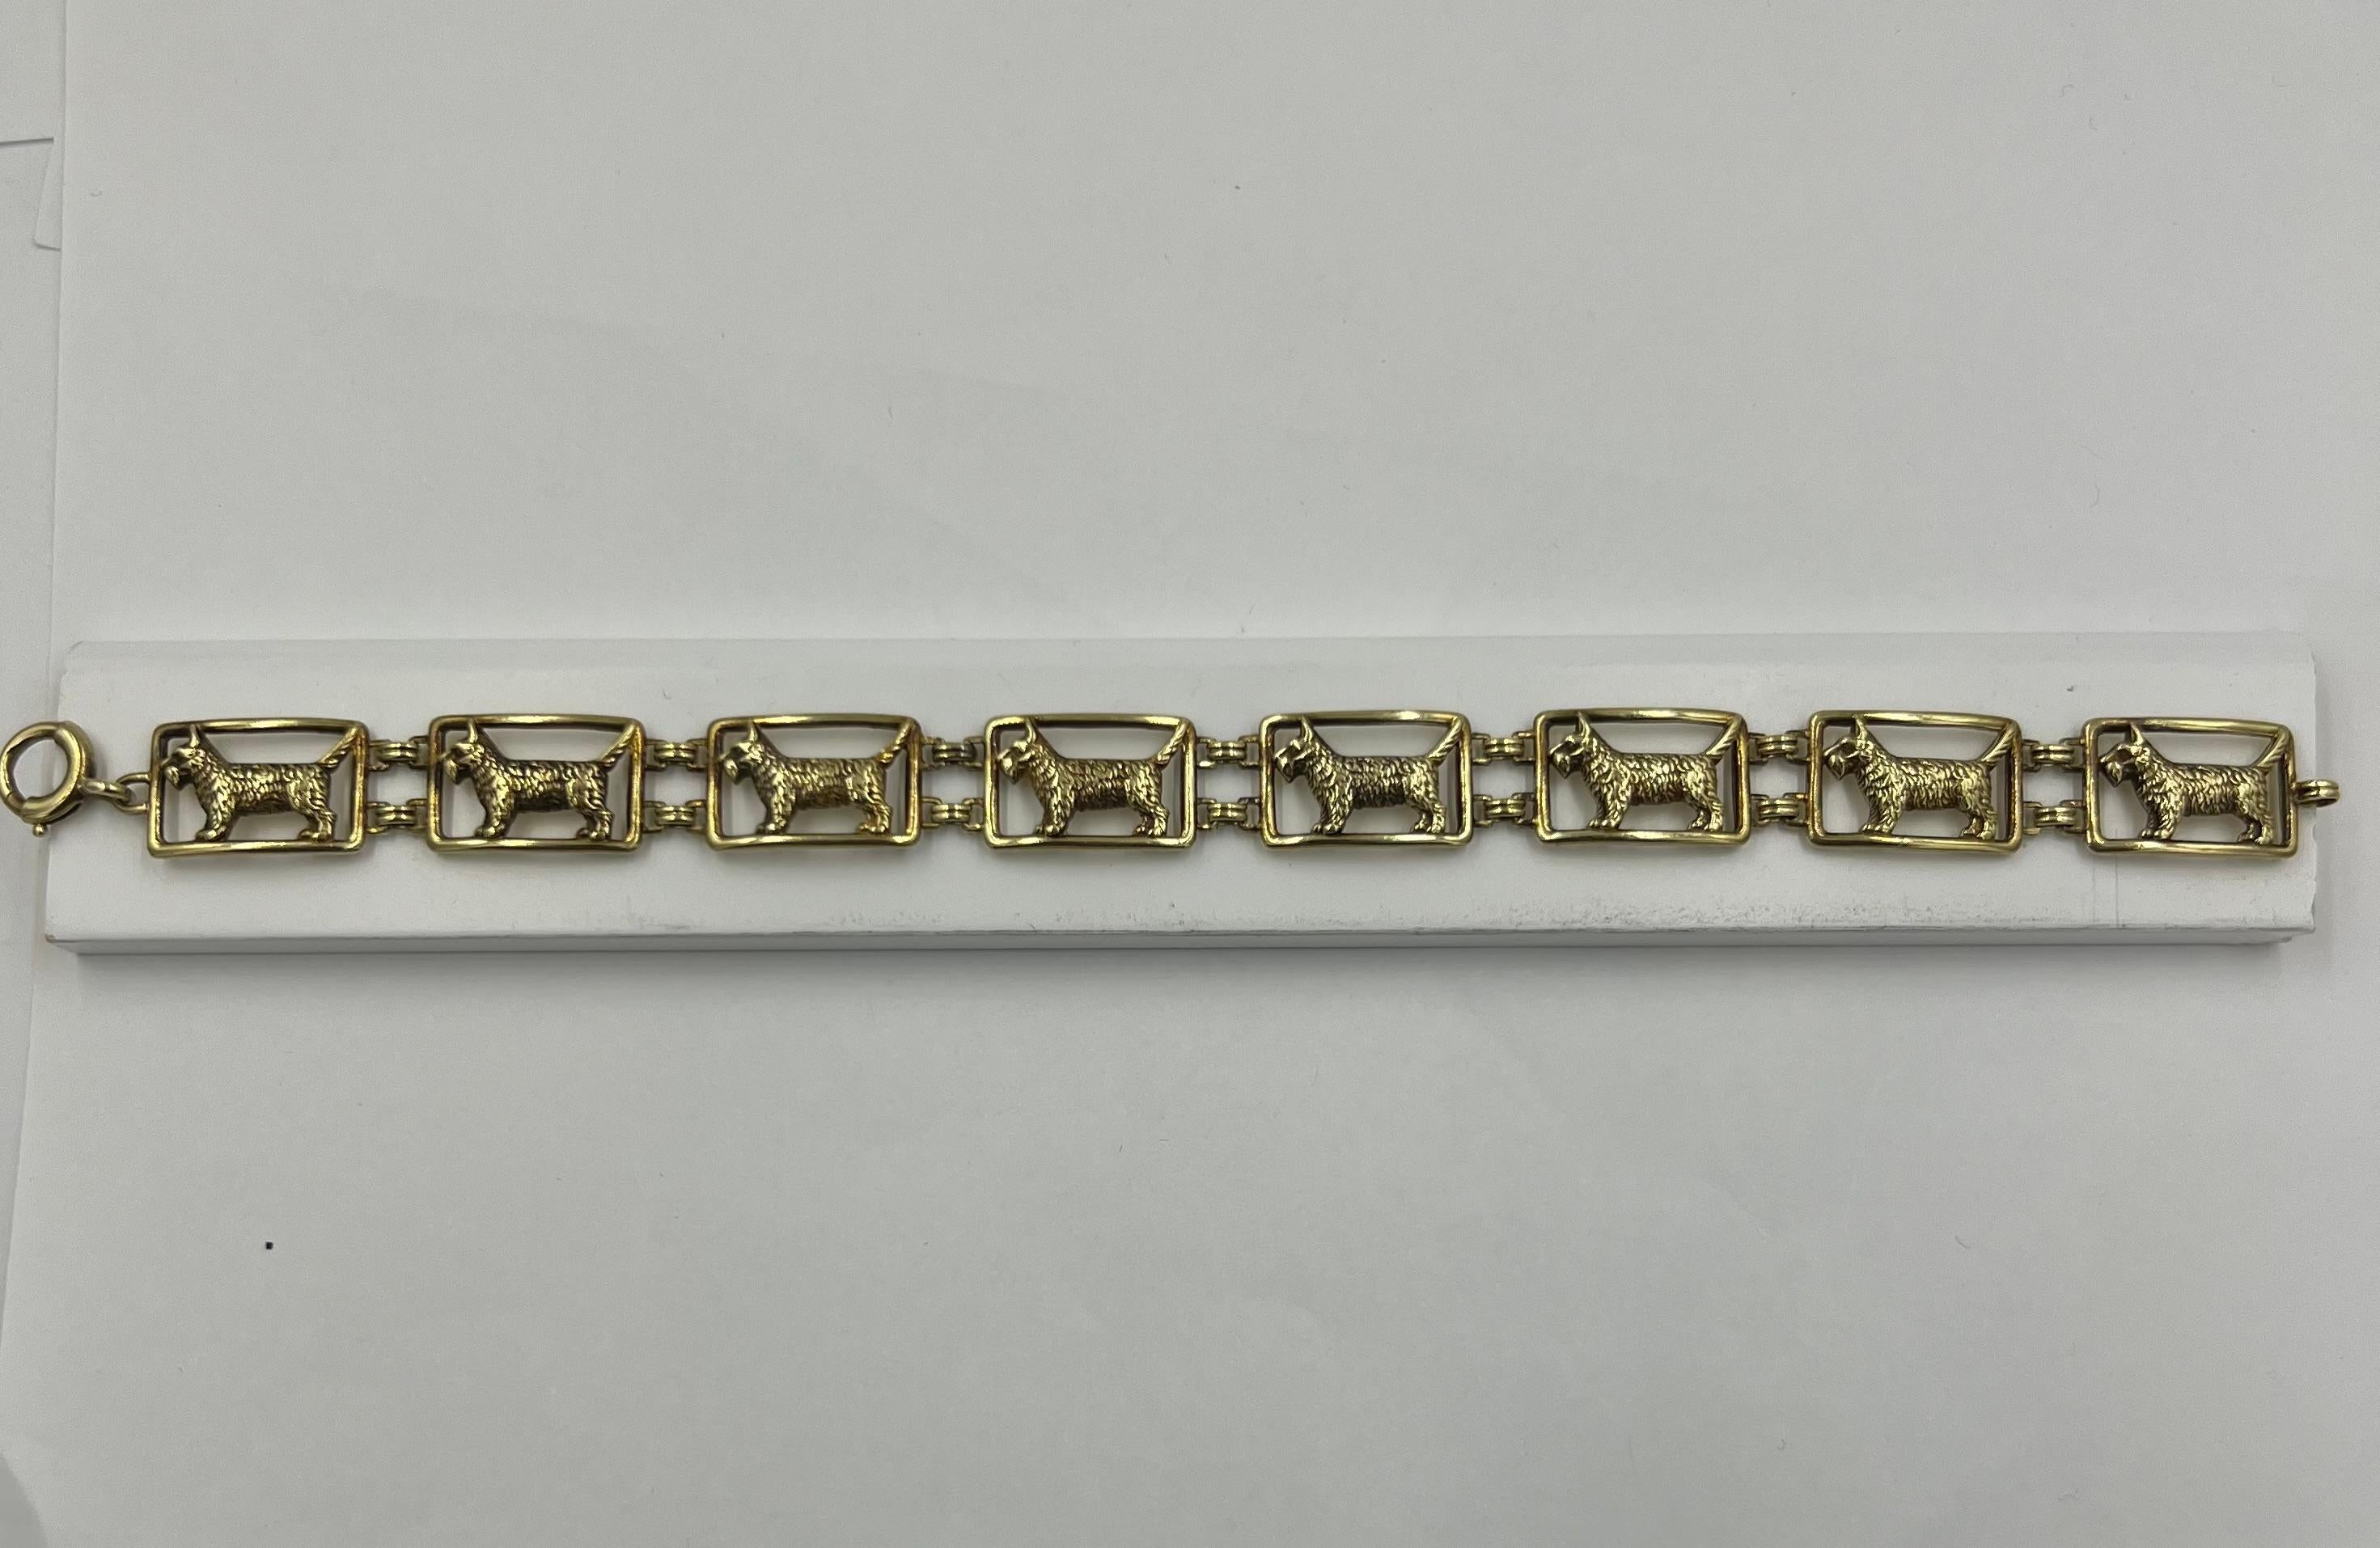 Art Deco Scottie Dog yellow gold bracelet, circa 1925
This Art Deco Scottie Dog Yellow Gold Bracelet is a stunning piece of jewelry that embodies the elegance and sophistication of the Art Deco era. Crafted from luxurious yellow gold, this bracelet